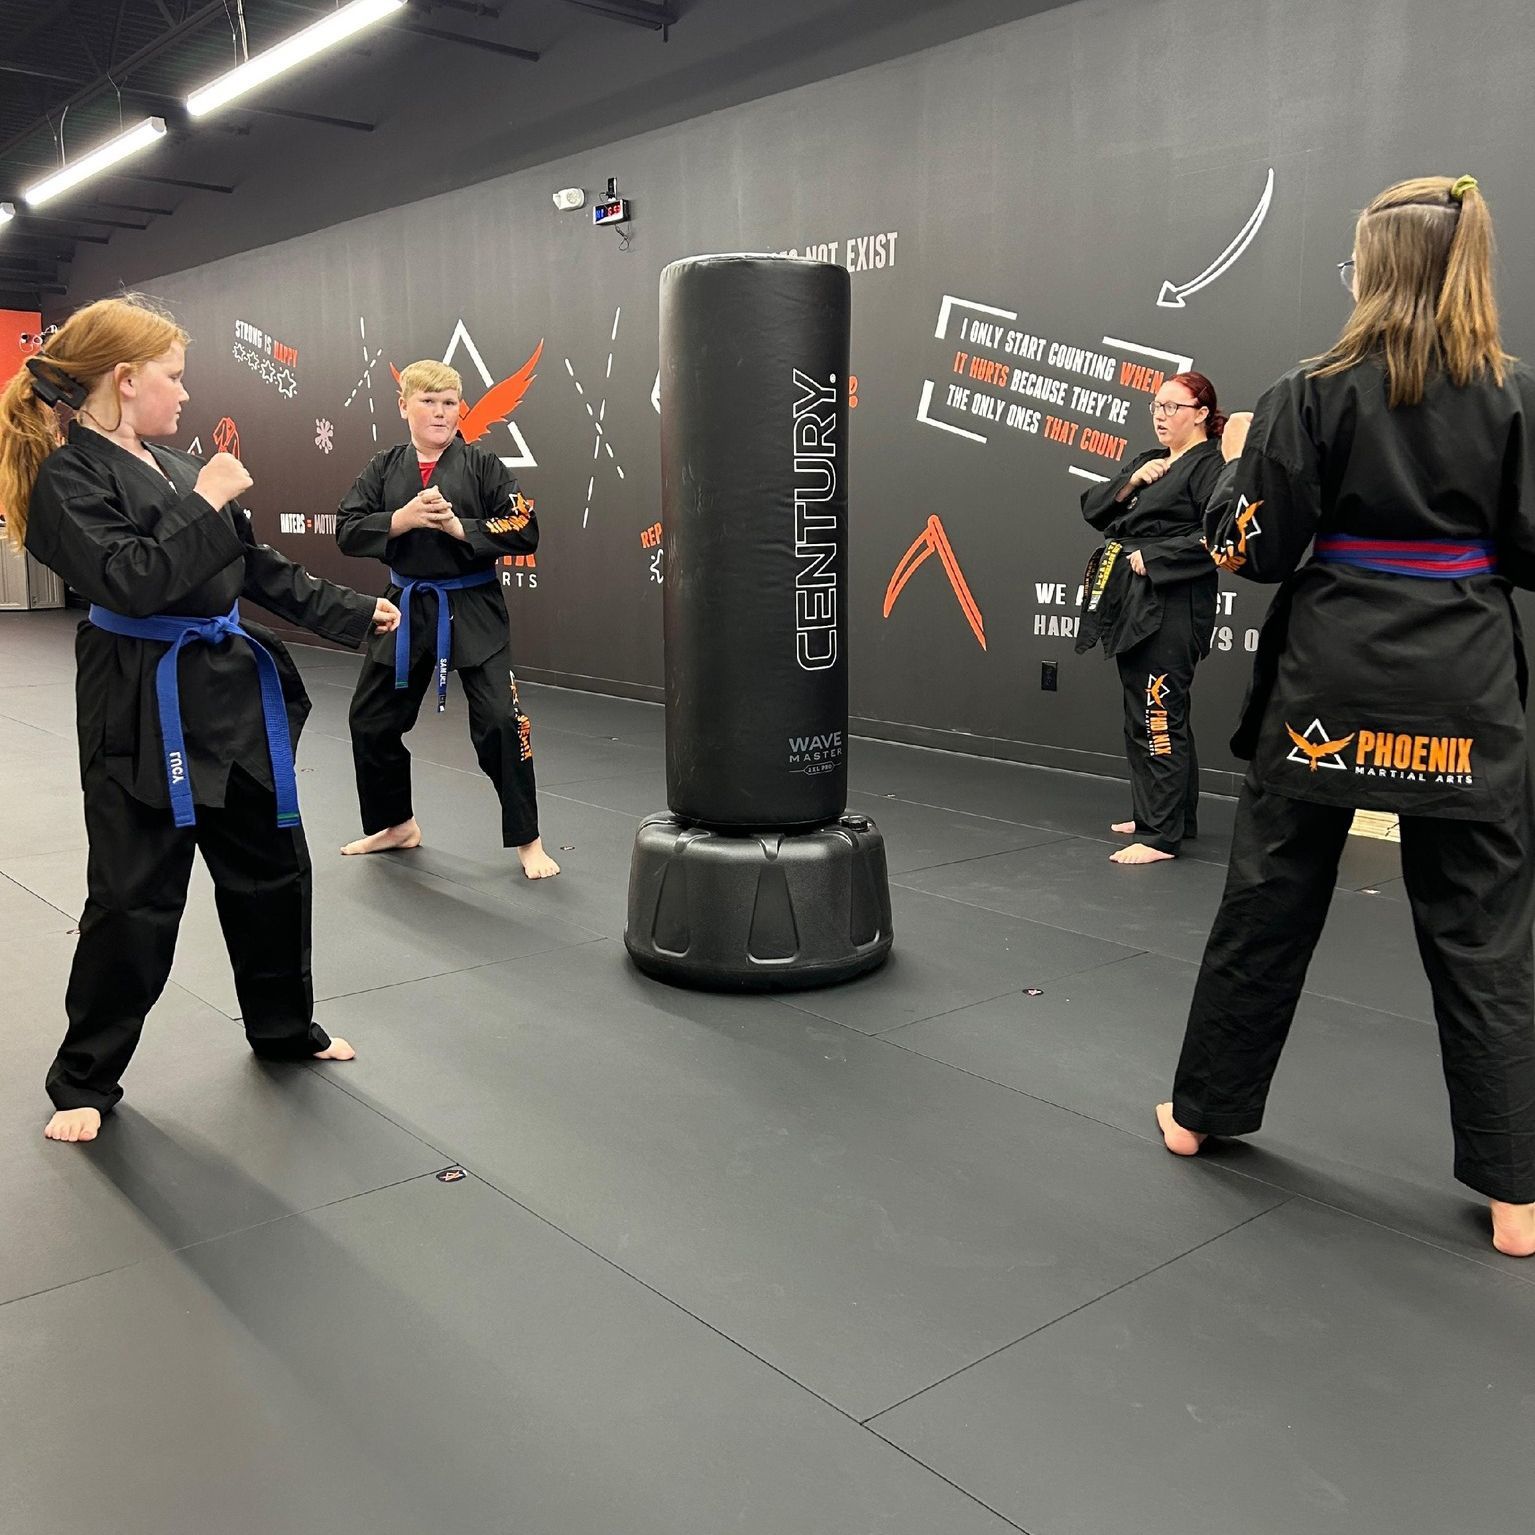 a group of people are practicing martial arts in a gym .